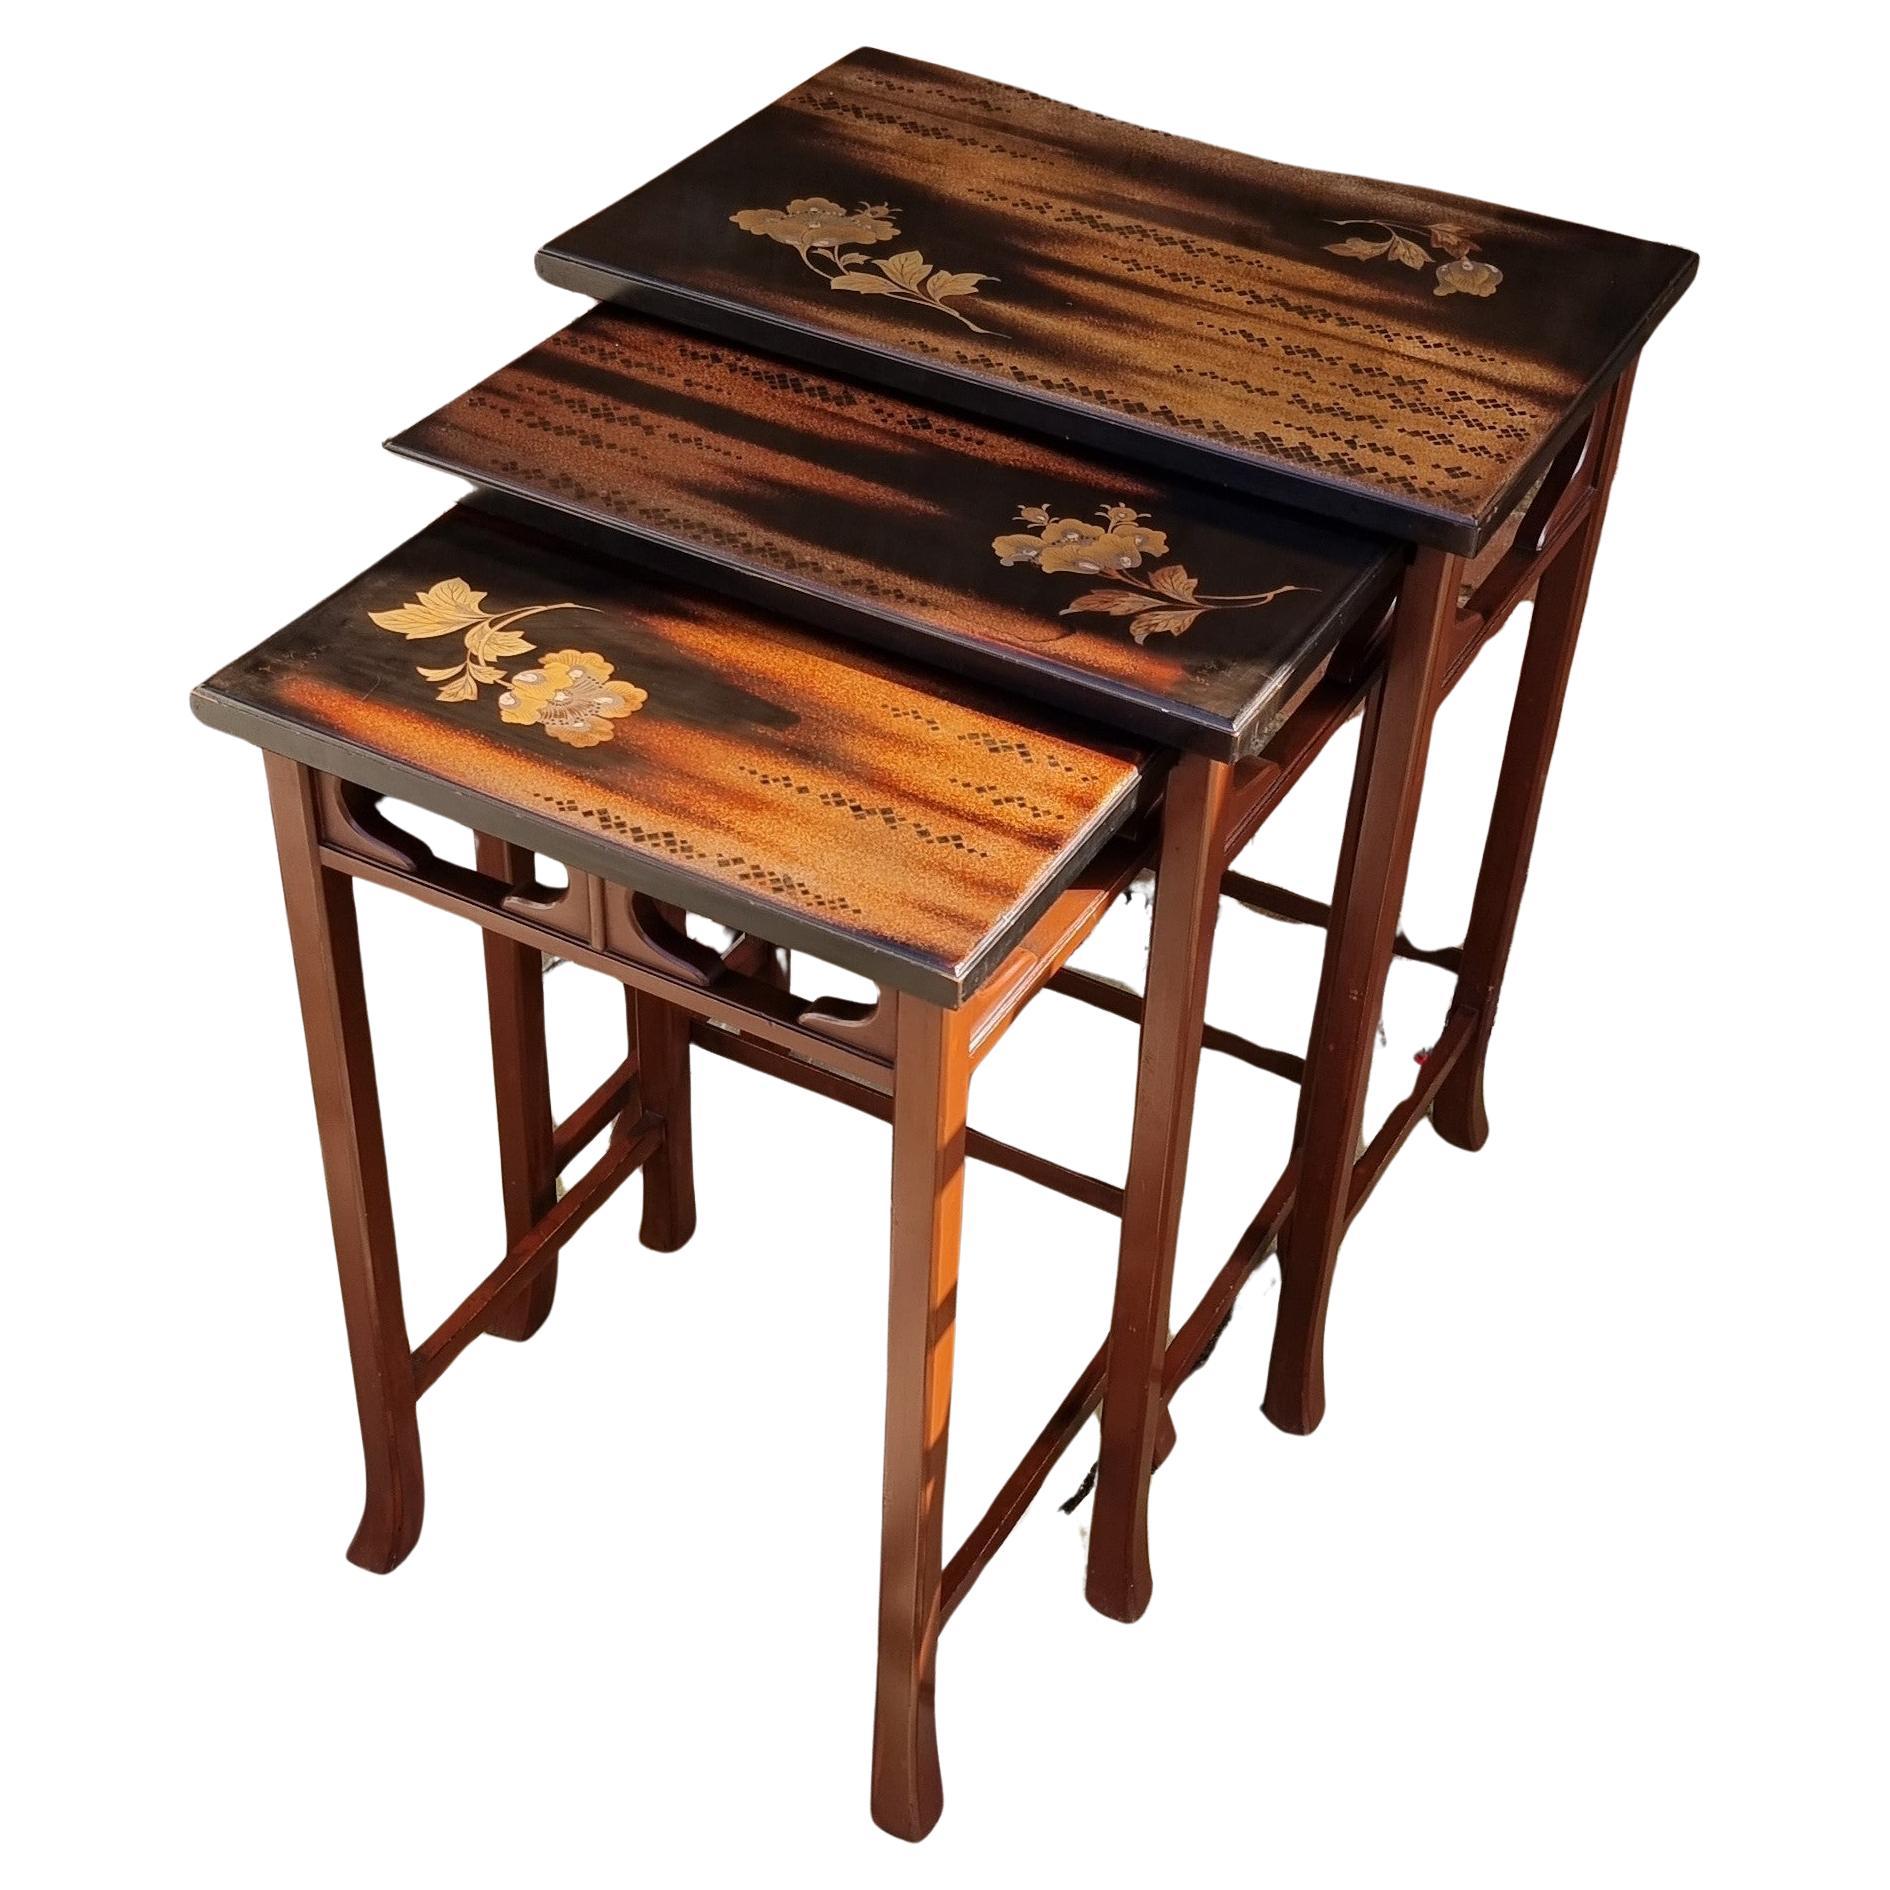 A nest of three Japanese hardwood and lacquer nest of tables circa 1910